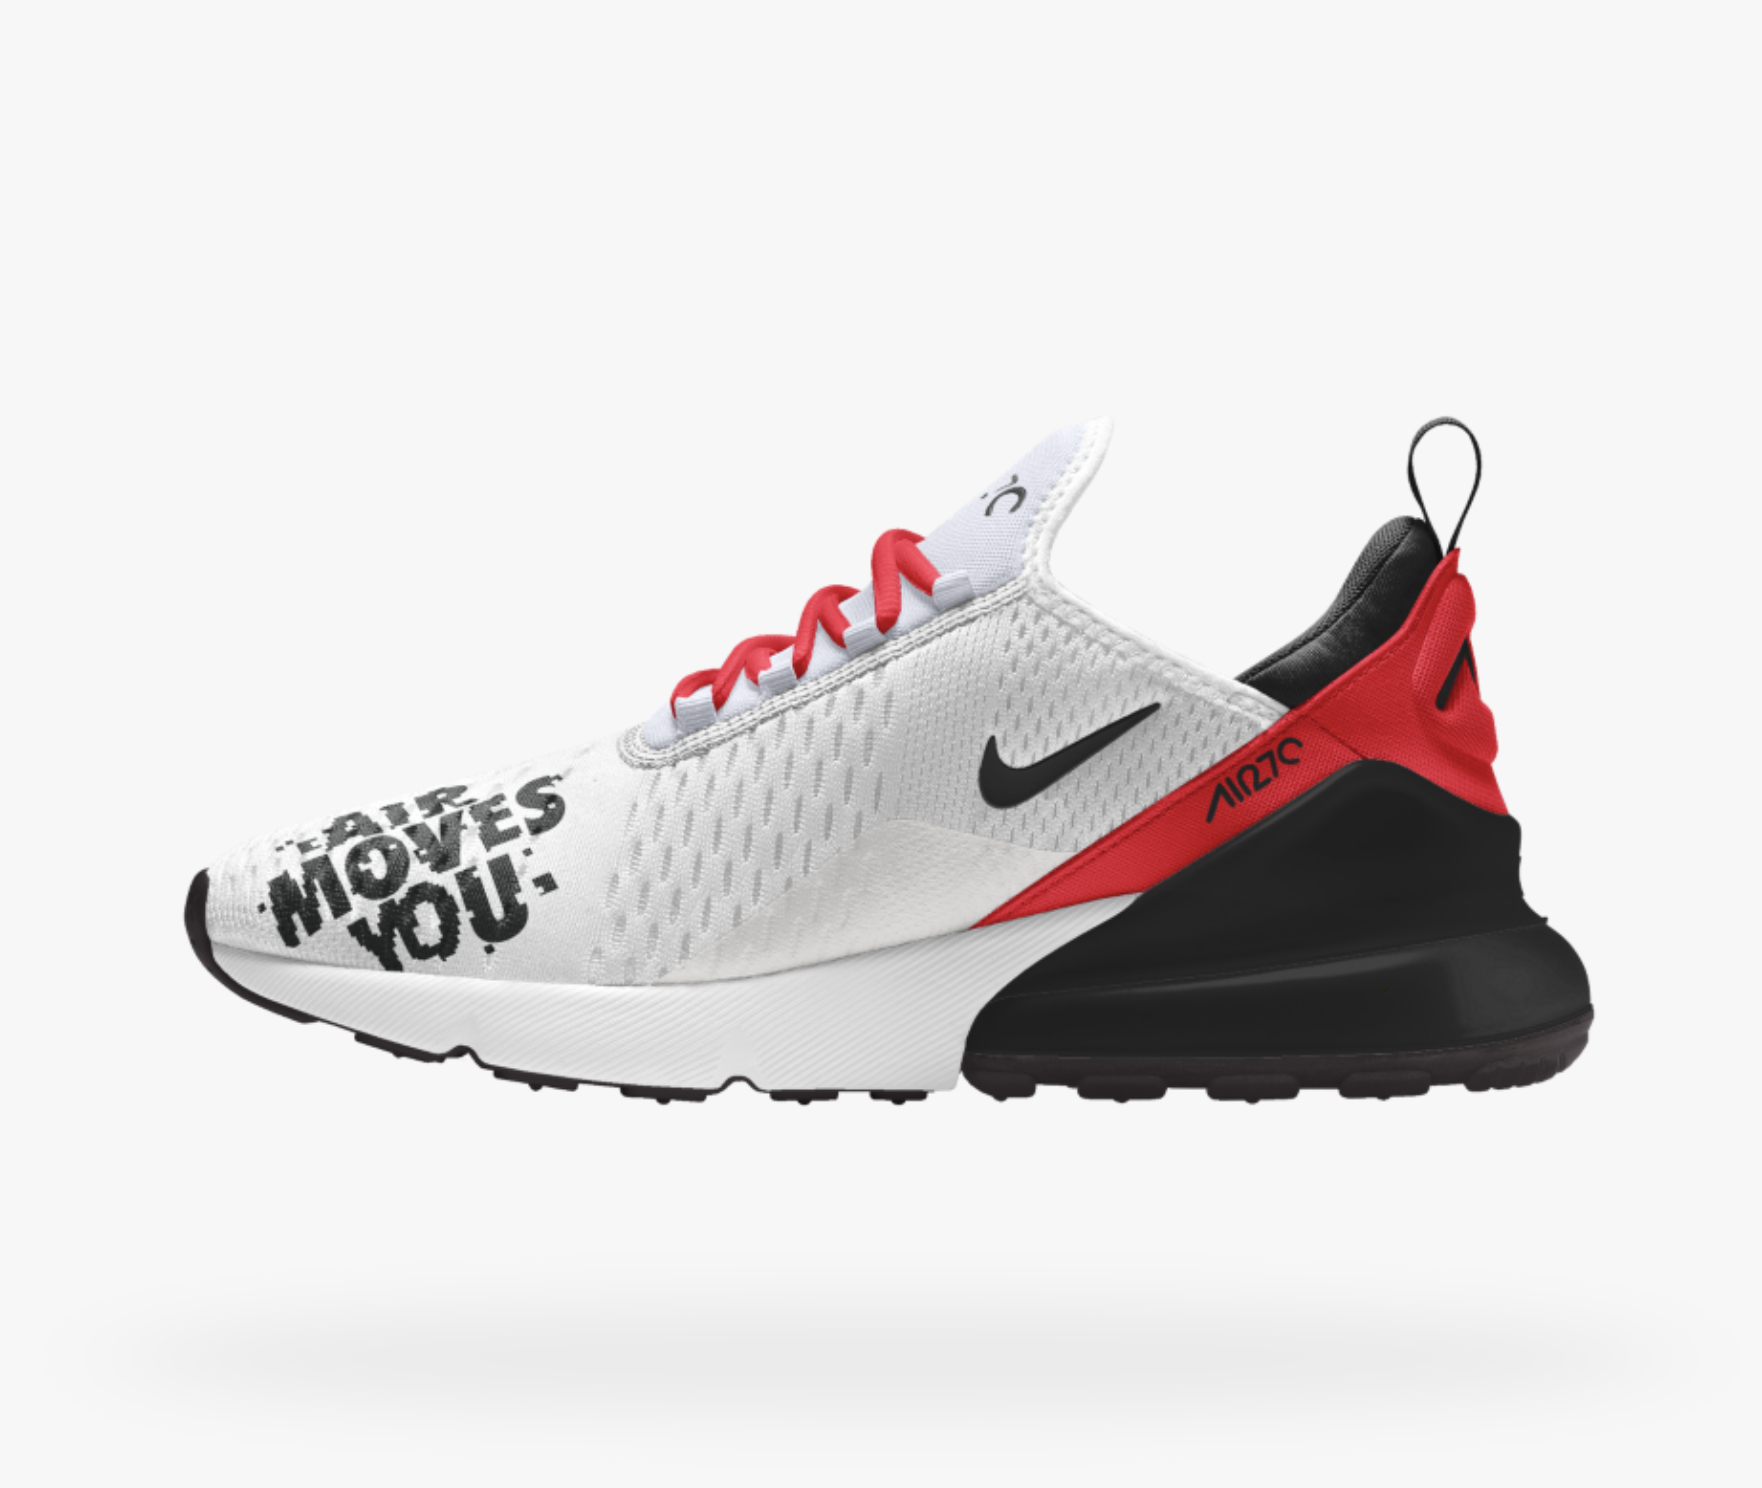 Now Available: Nike Air Max 270 ID 